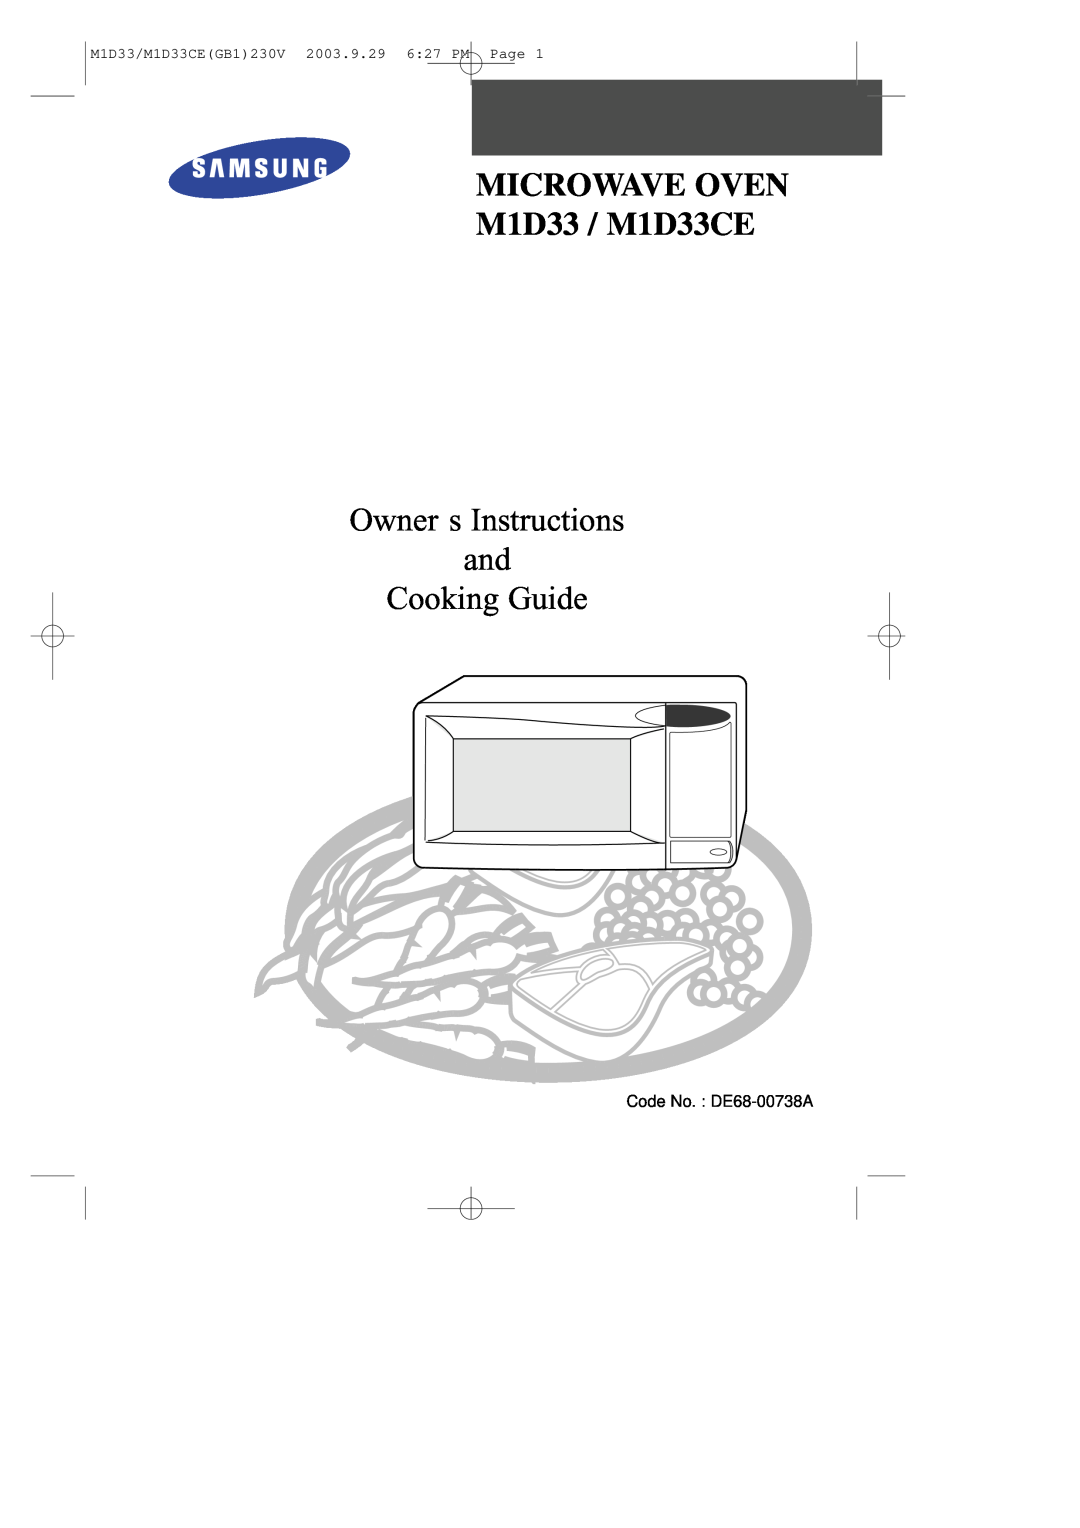 Samsung manual MICROWAVE OVEN M1D33 / M1D33CE, Owner s Instructions and Cooking Guide 